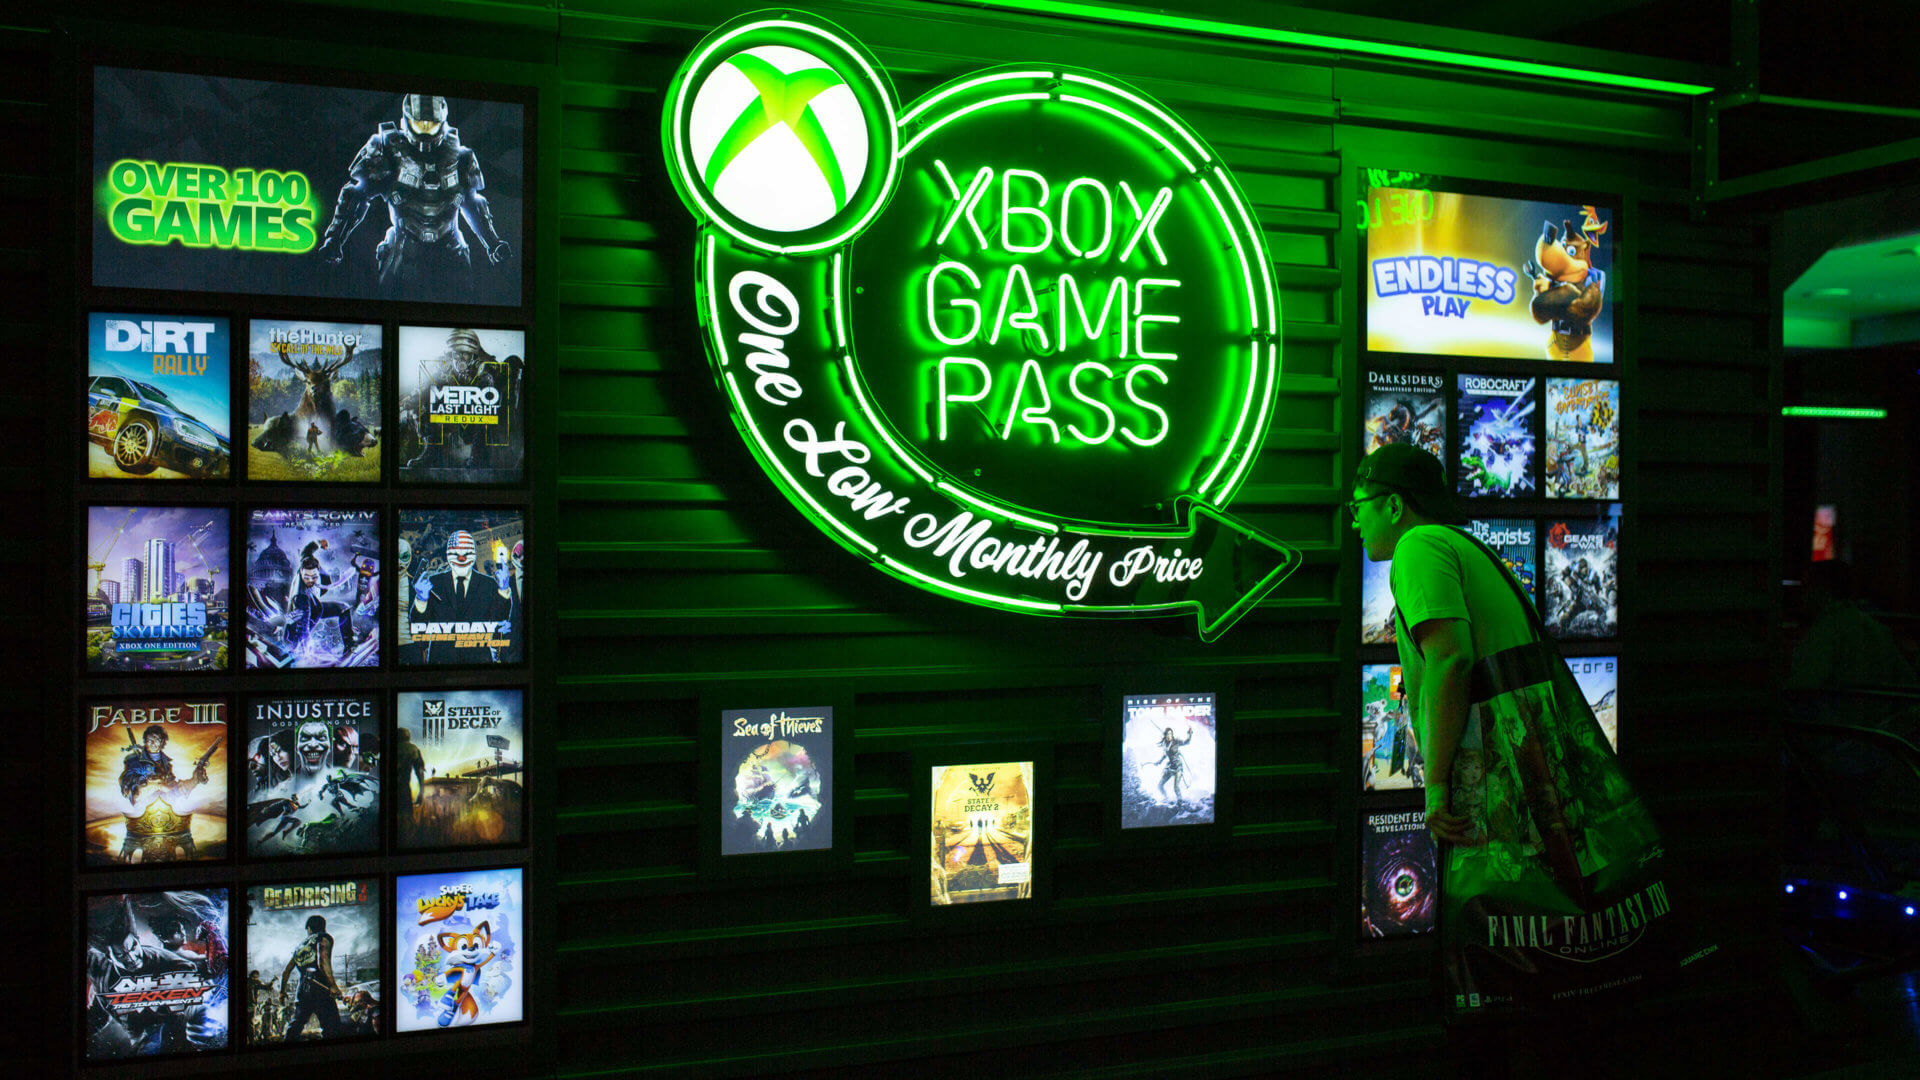 xbox game pass ultimate e3 19 deal